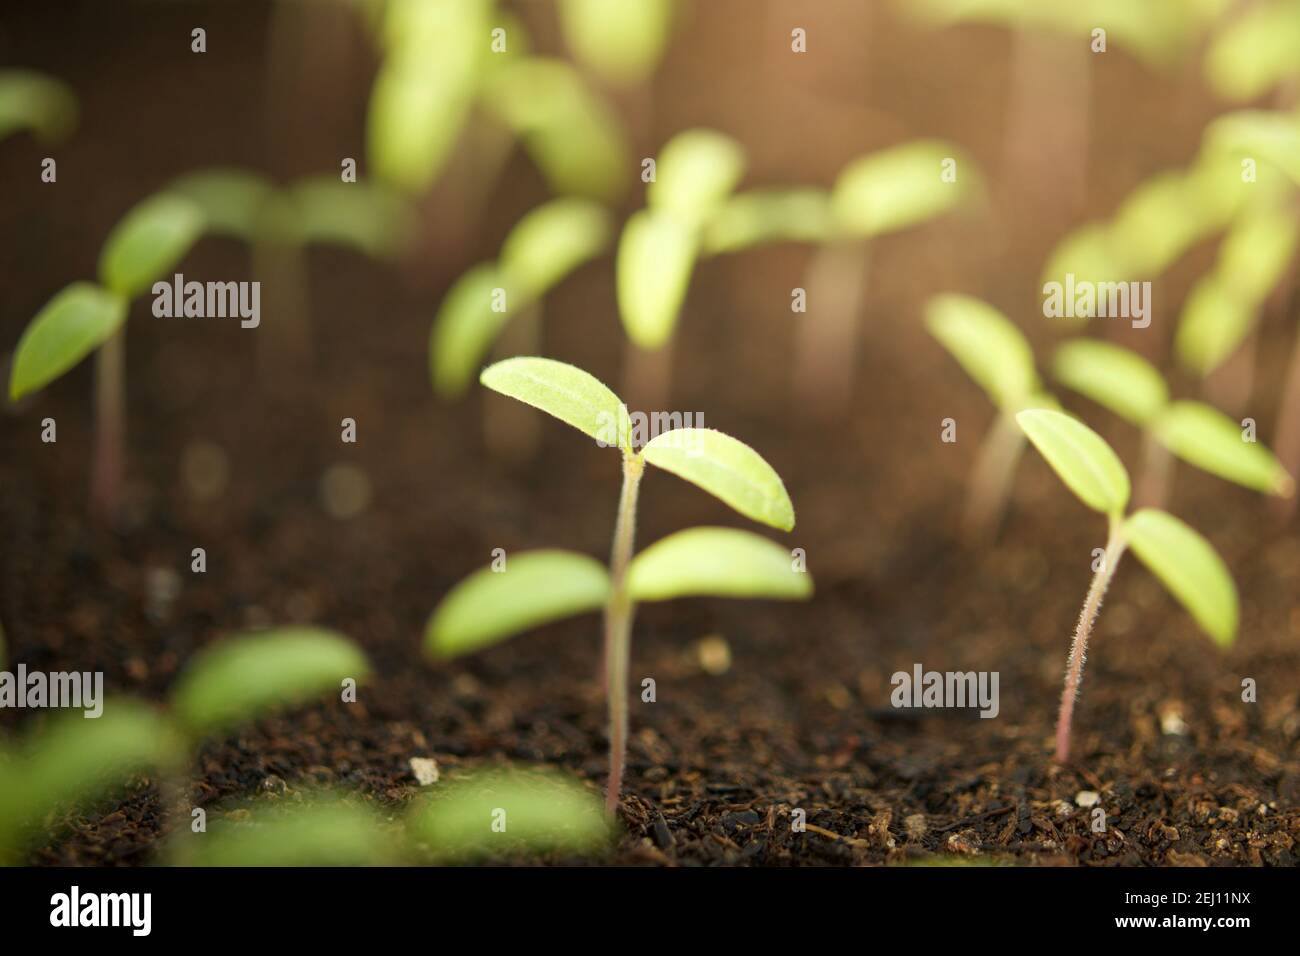 Tomato seedlings growing in soil with one in focus and center. Stock Photo